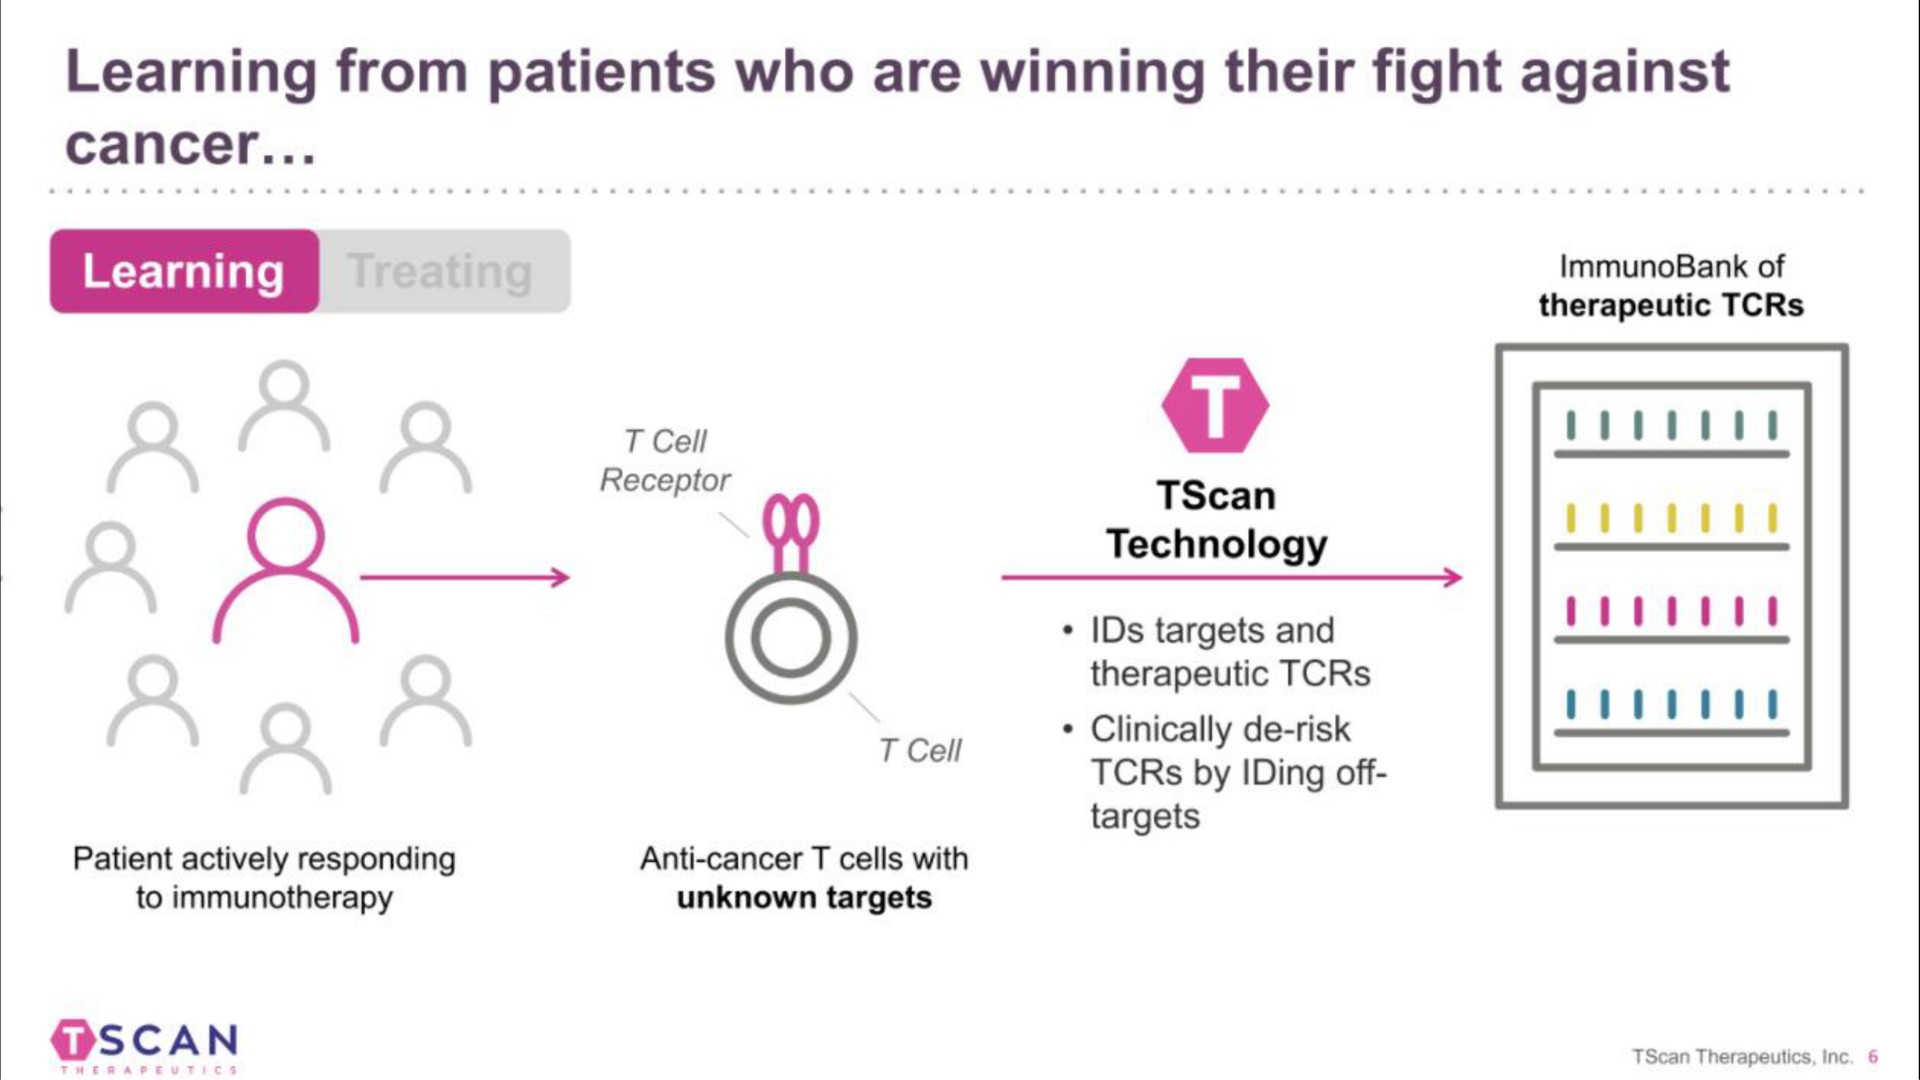 learning from patients who are winning their fight against cancer | TScan Therapeutics